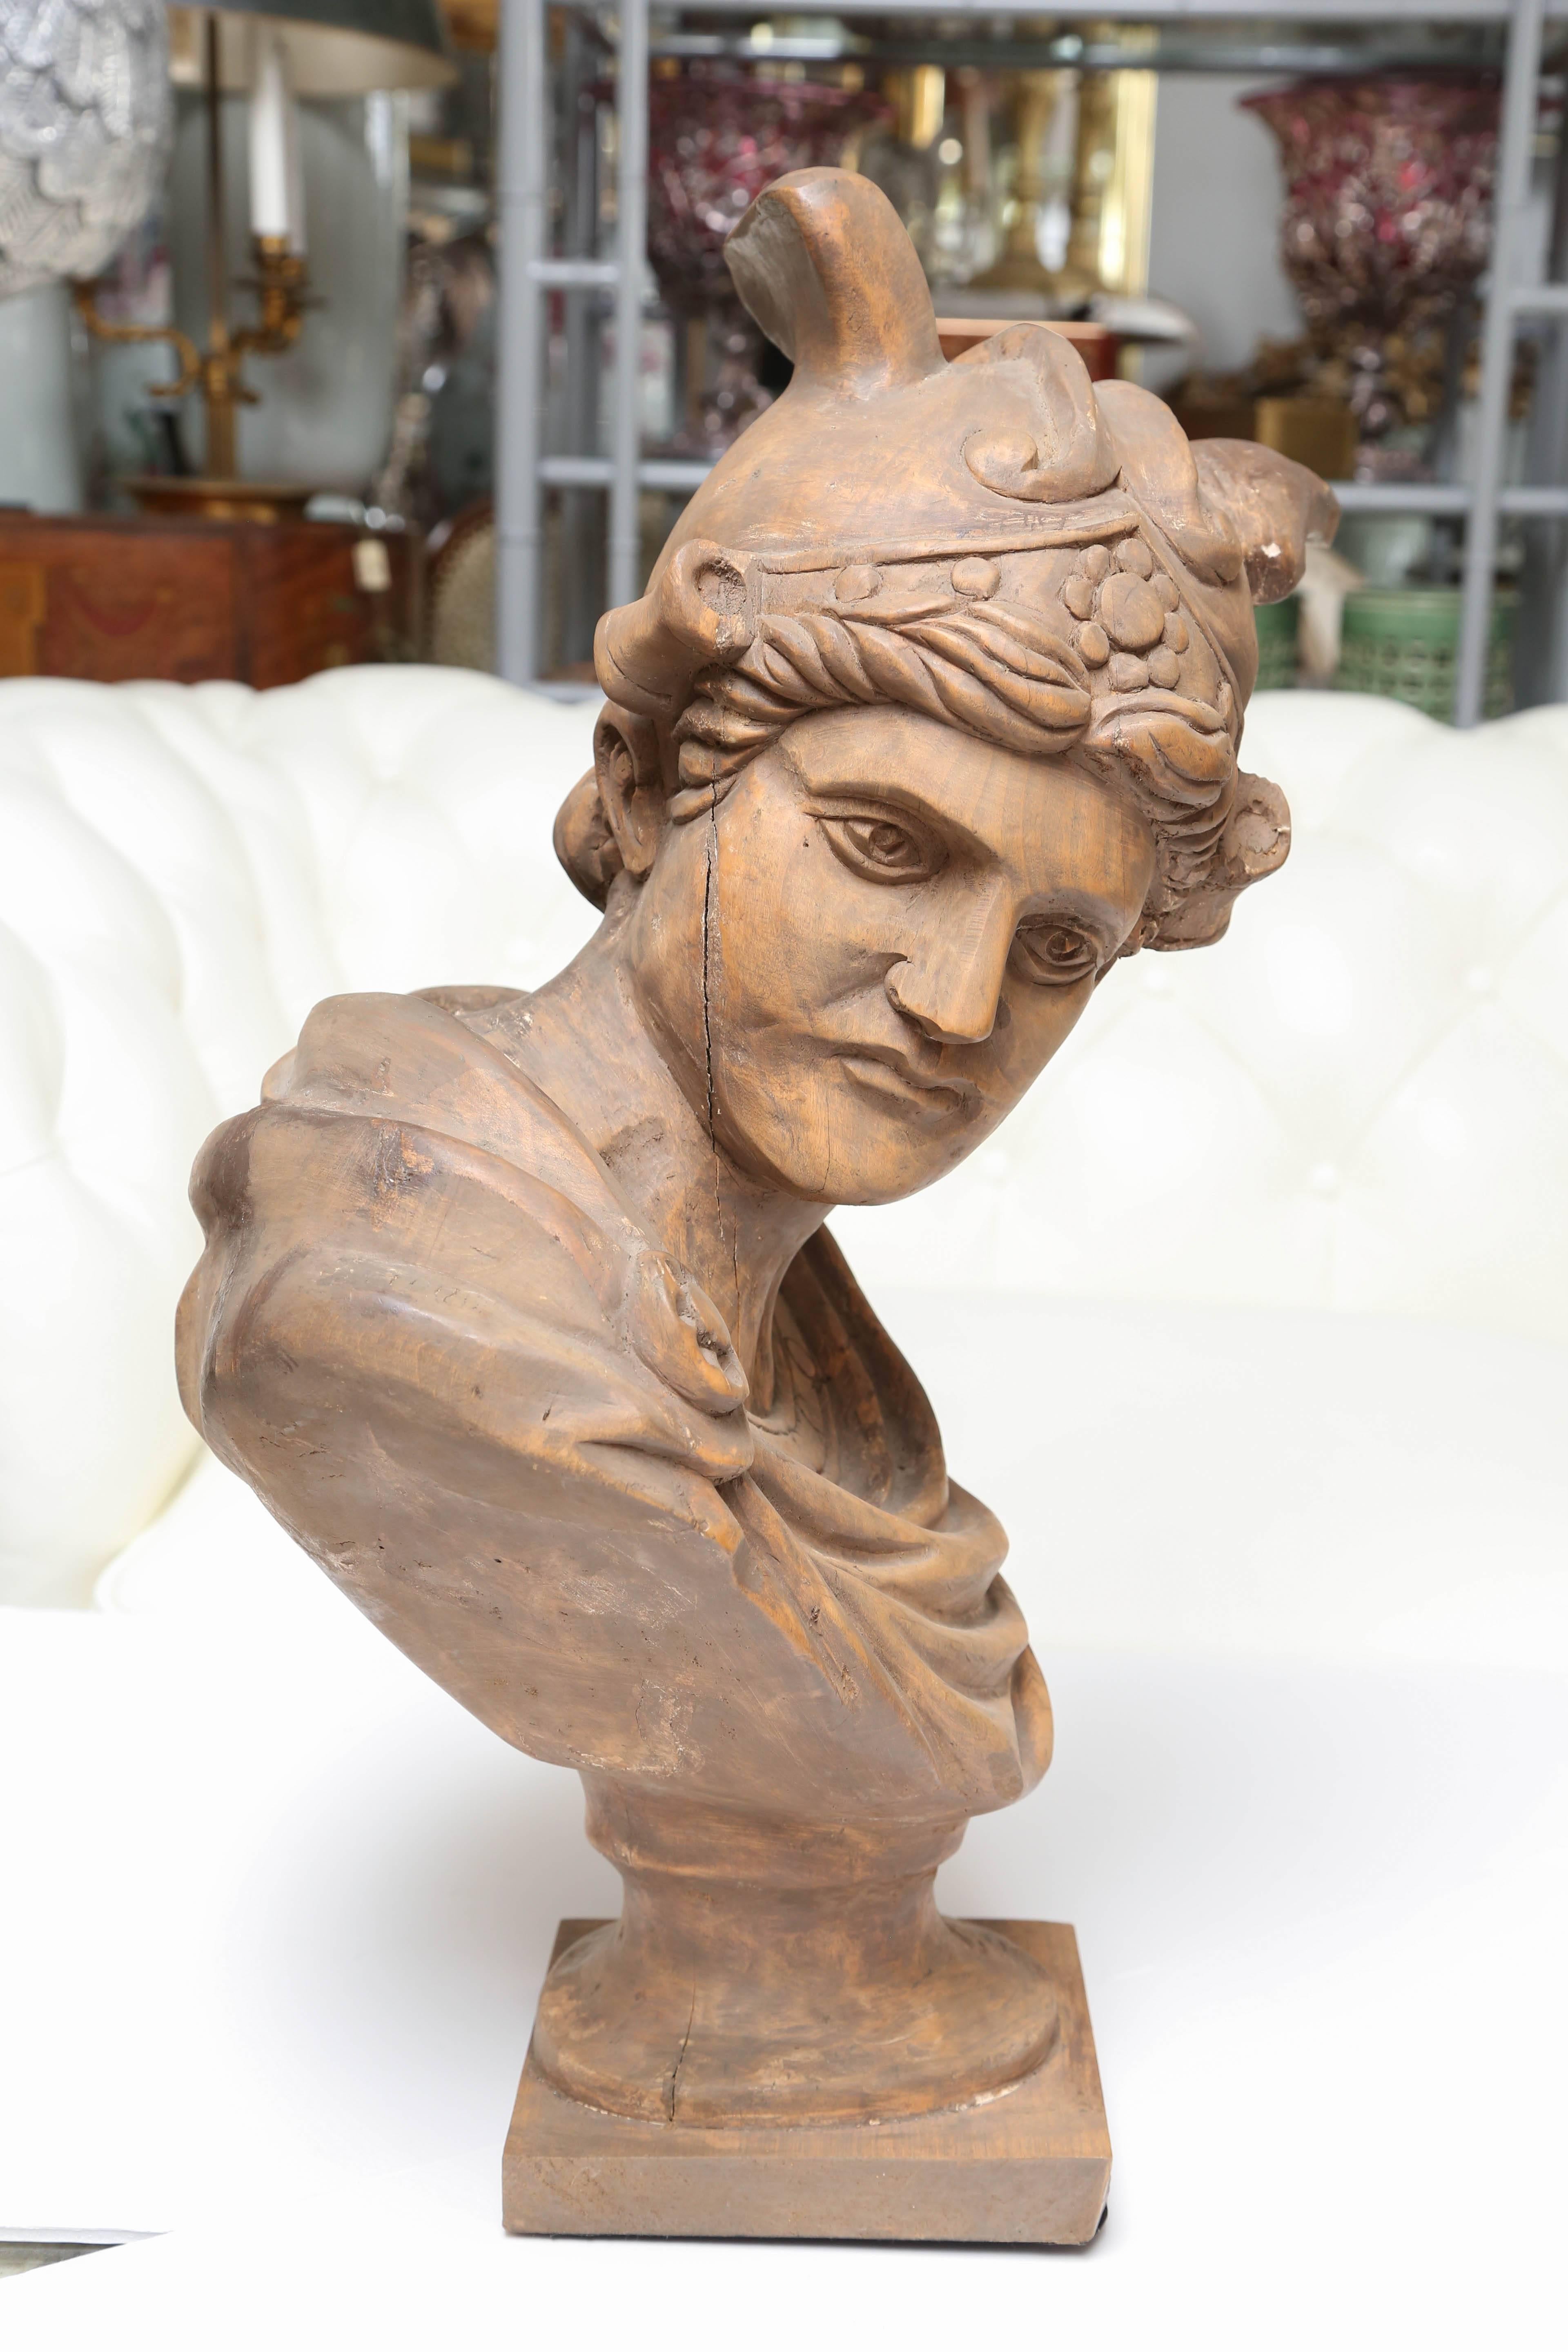 Nearly lifesize with an expressive face.
Carved from a single piece of wood.